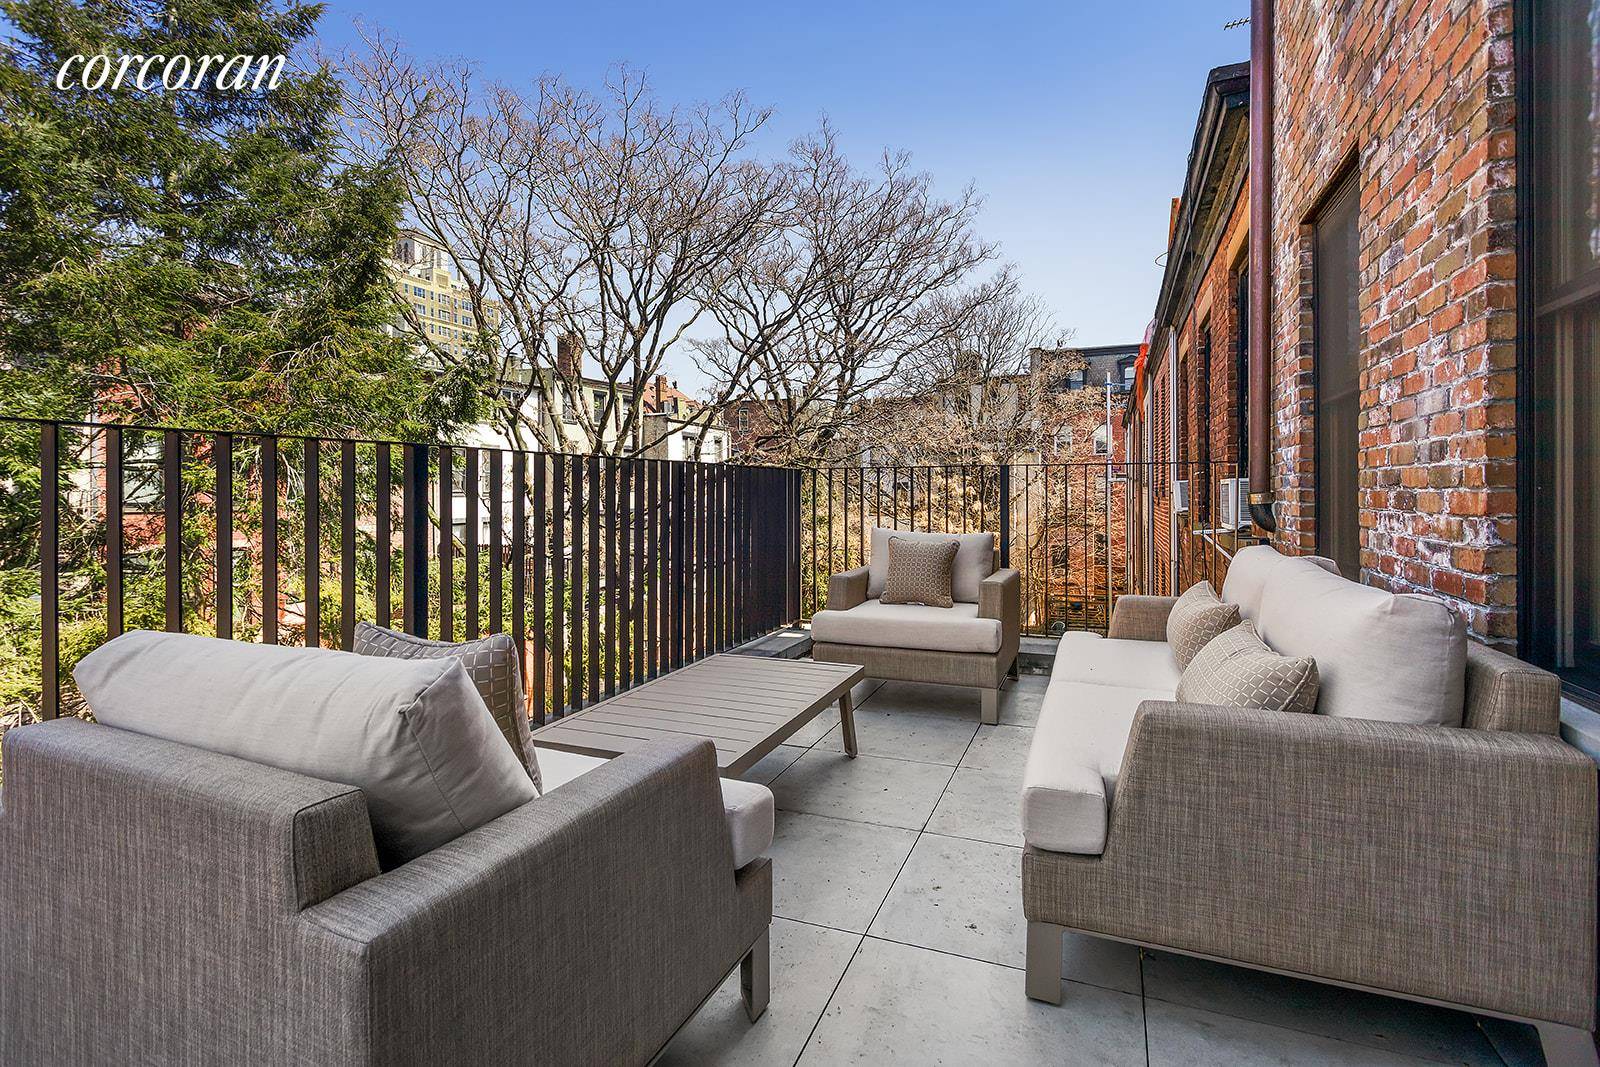 For the discerning renter who appreciates outdoor space, modern design and high tech living.